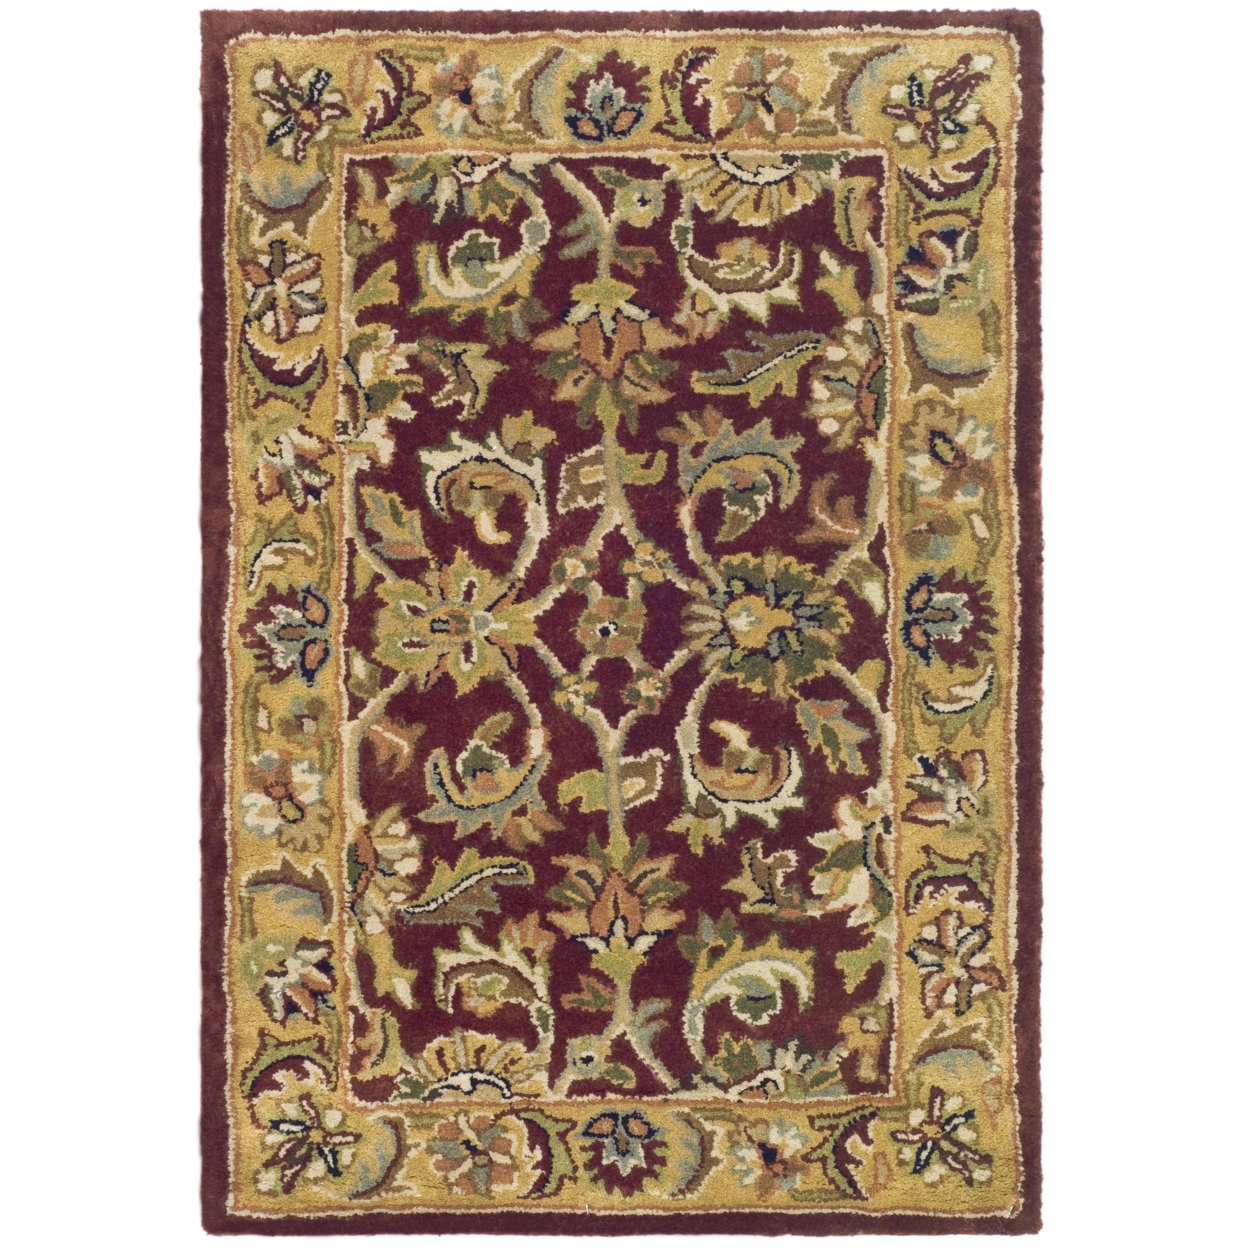 SAFAVIEH Classic Collection CL758C Handmade Red/Gold Rug - 2' 3 X 8'